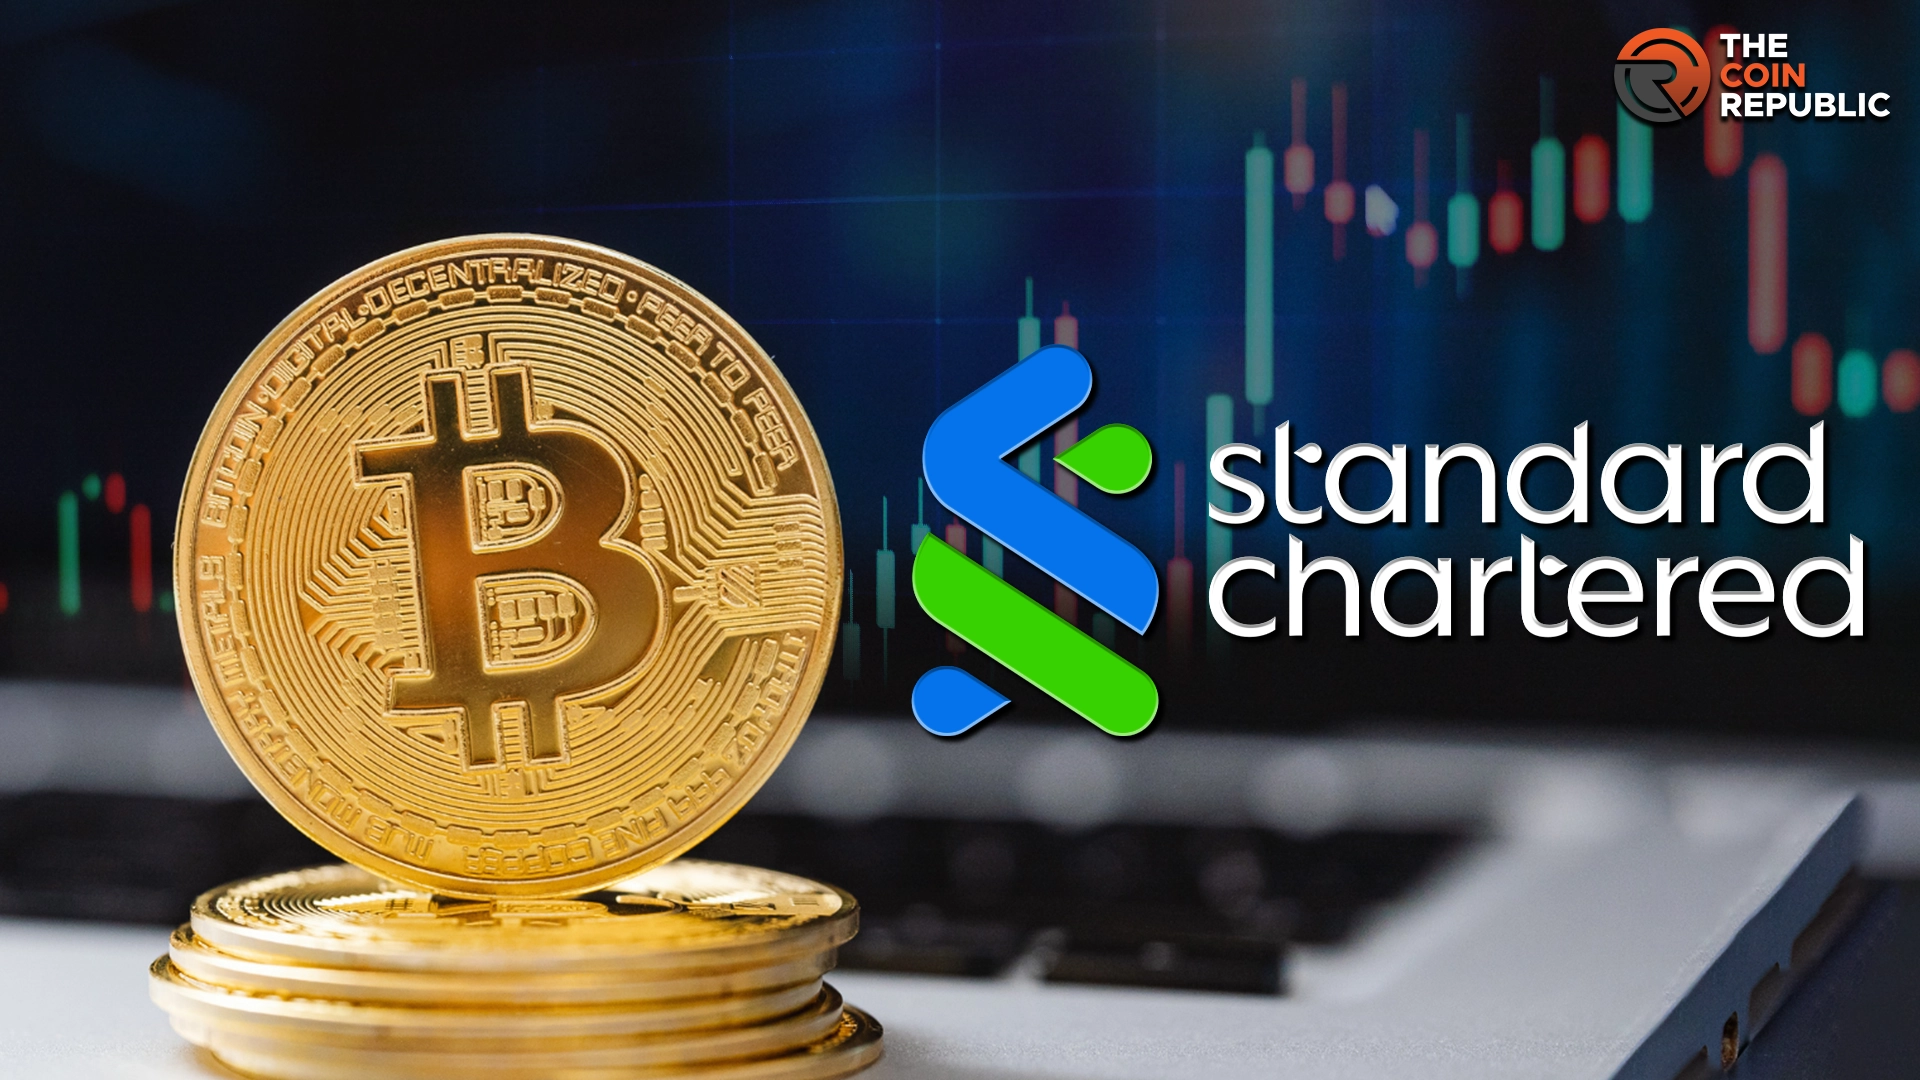 Bitcoin Could Plunge To $50K, Warns Standard Chartered